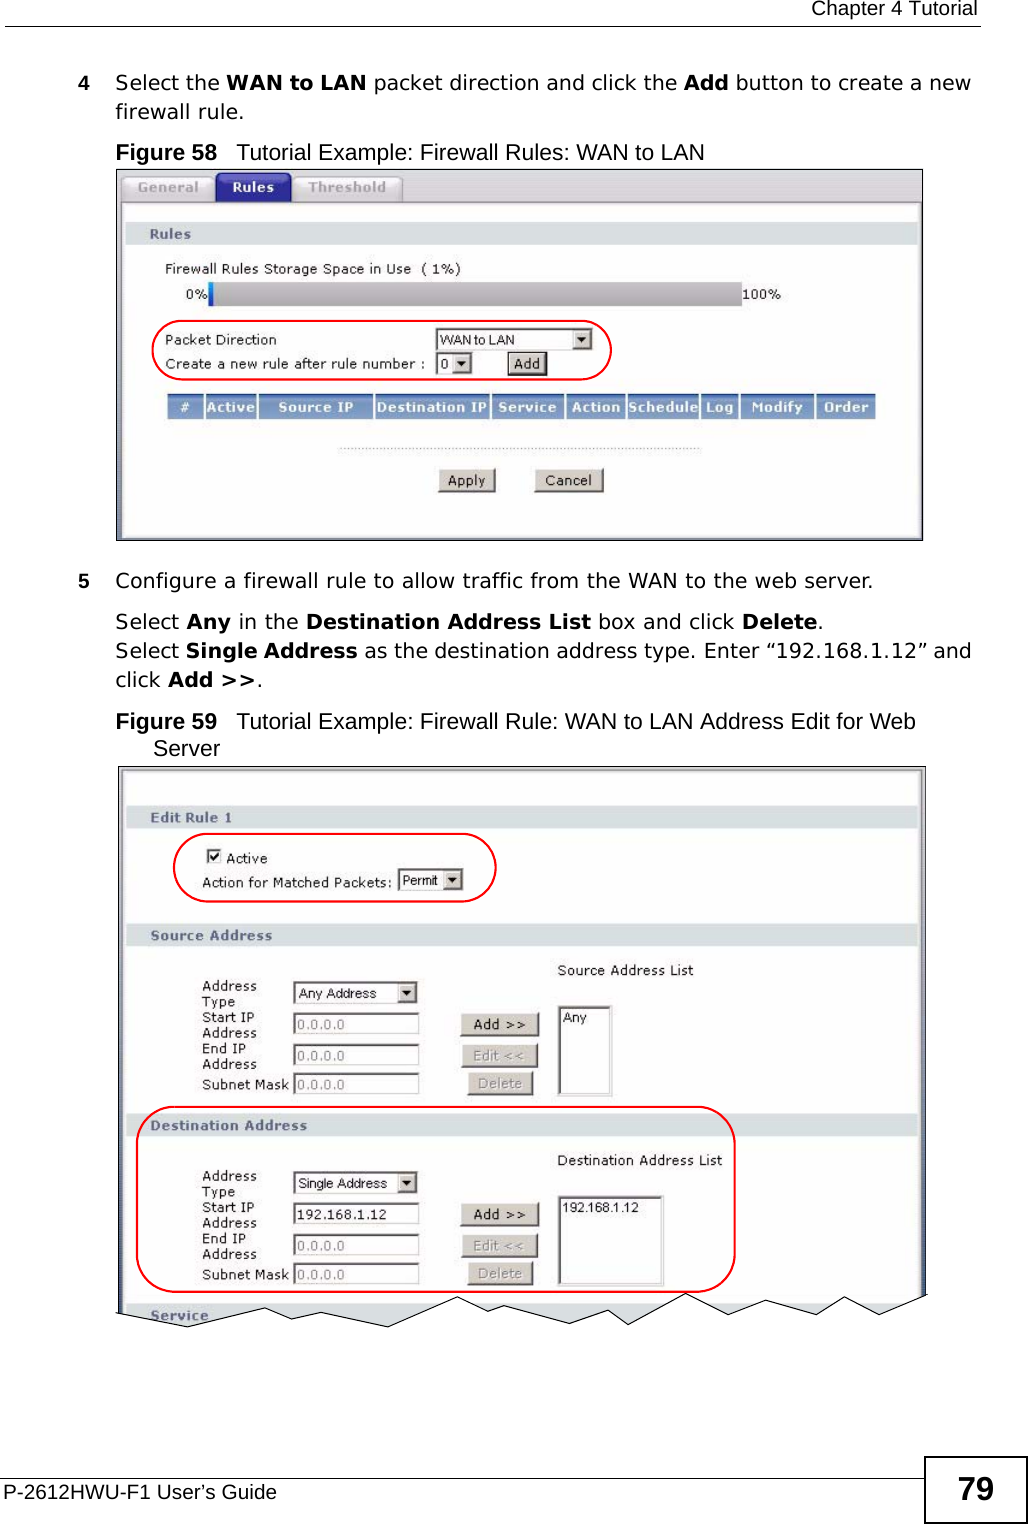  Chapter 4 TutorialP-2612HWU-F1 User’s Guide 794Select the WAN to LAN packet direction and click the Add button to create a new firewall rule.Figure 58   Tutorial Example: Firewall Rules: WAN to LAN  5Configure a firewall rule to allow traffic from the WAN to the web server.Select Any in the Destination Address List box and click Delete.Select Single Address as the destination address type. Enter “192.168.1.12” and click Add &gt;&gt;.Figure 59   Tutorial Example: Firewall Rule: WAN to LAN Address Edit for Web Server 